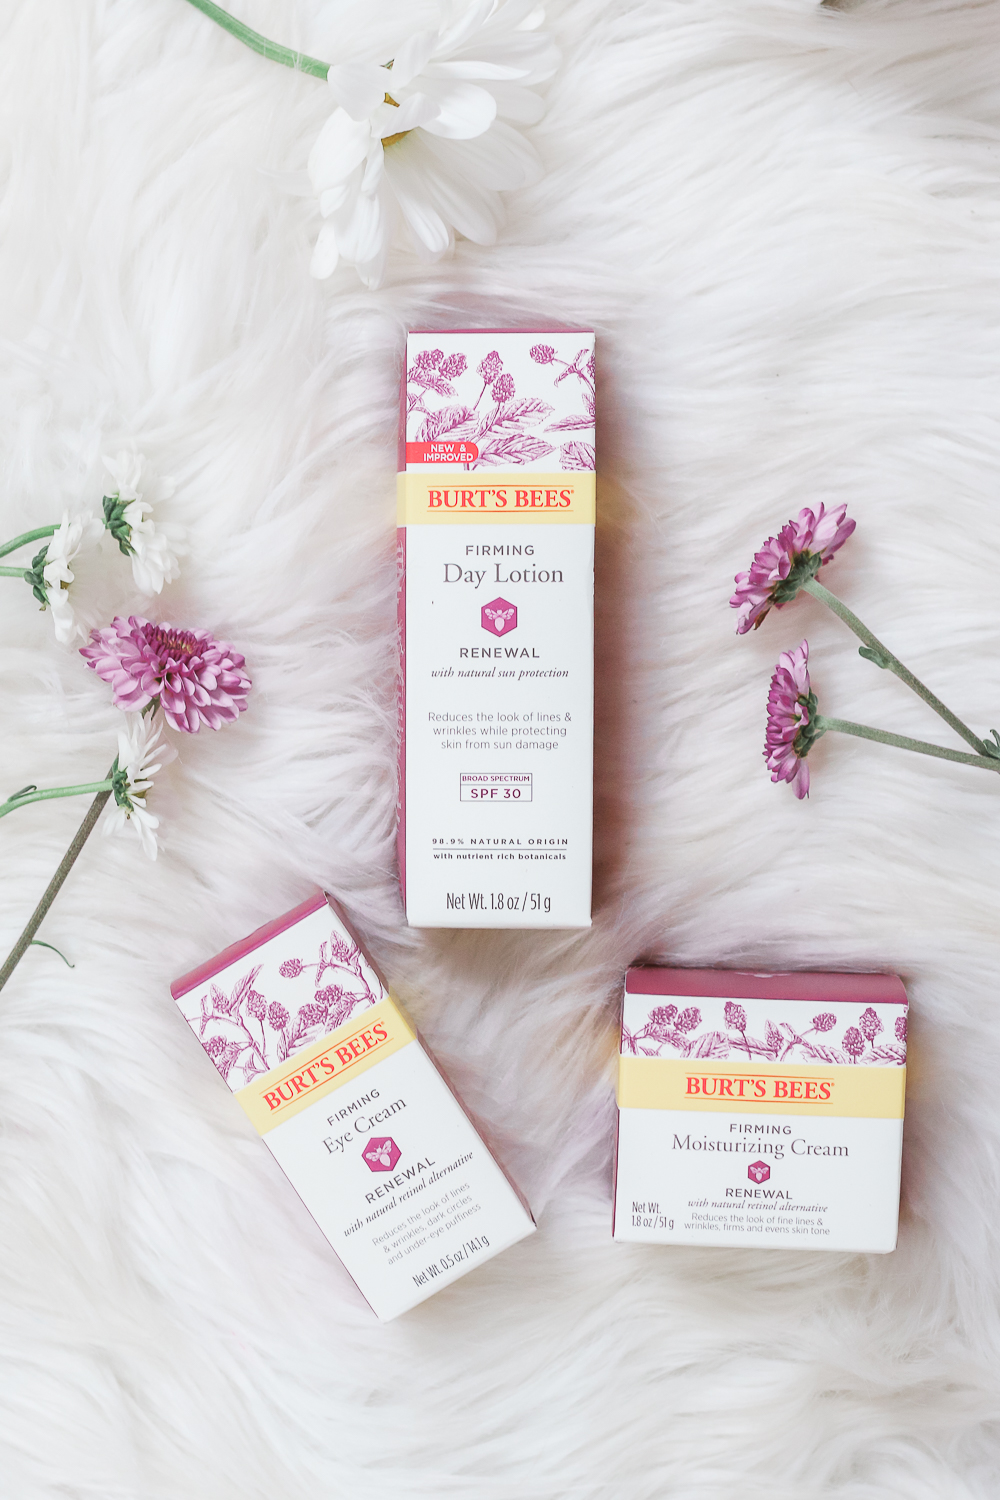 As part of a complete Burt's Bees Renewal skincare review, beauty blogger Stephanie Ziajka shares a Burt's Bees Renewal Eye Cream review, Burt's Bees Renewal Day Lotion review, and Burt's Bees Renewal face moisturizer review on Diary of a Debutante